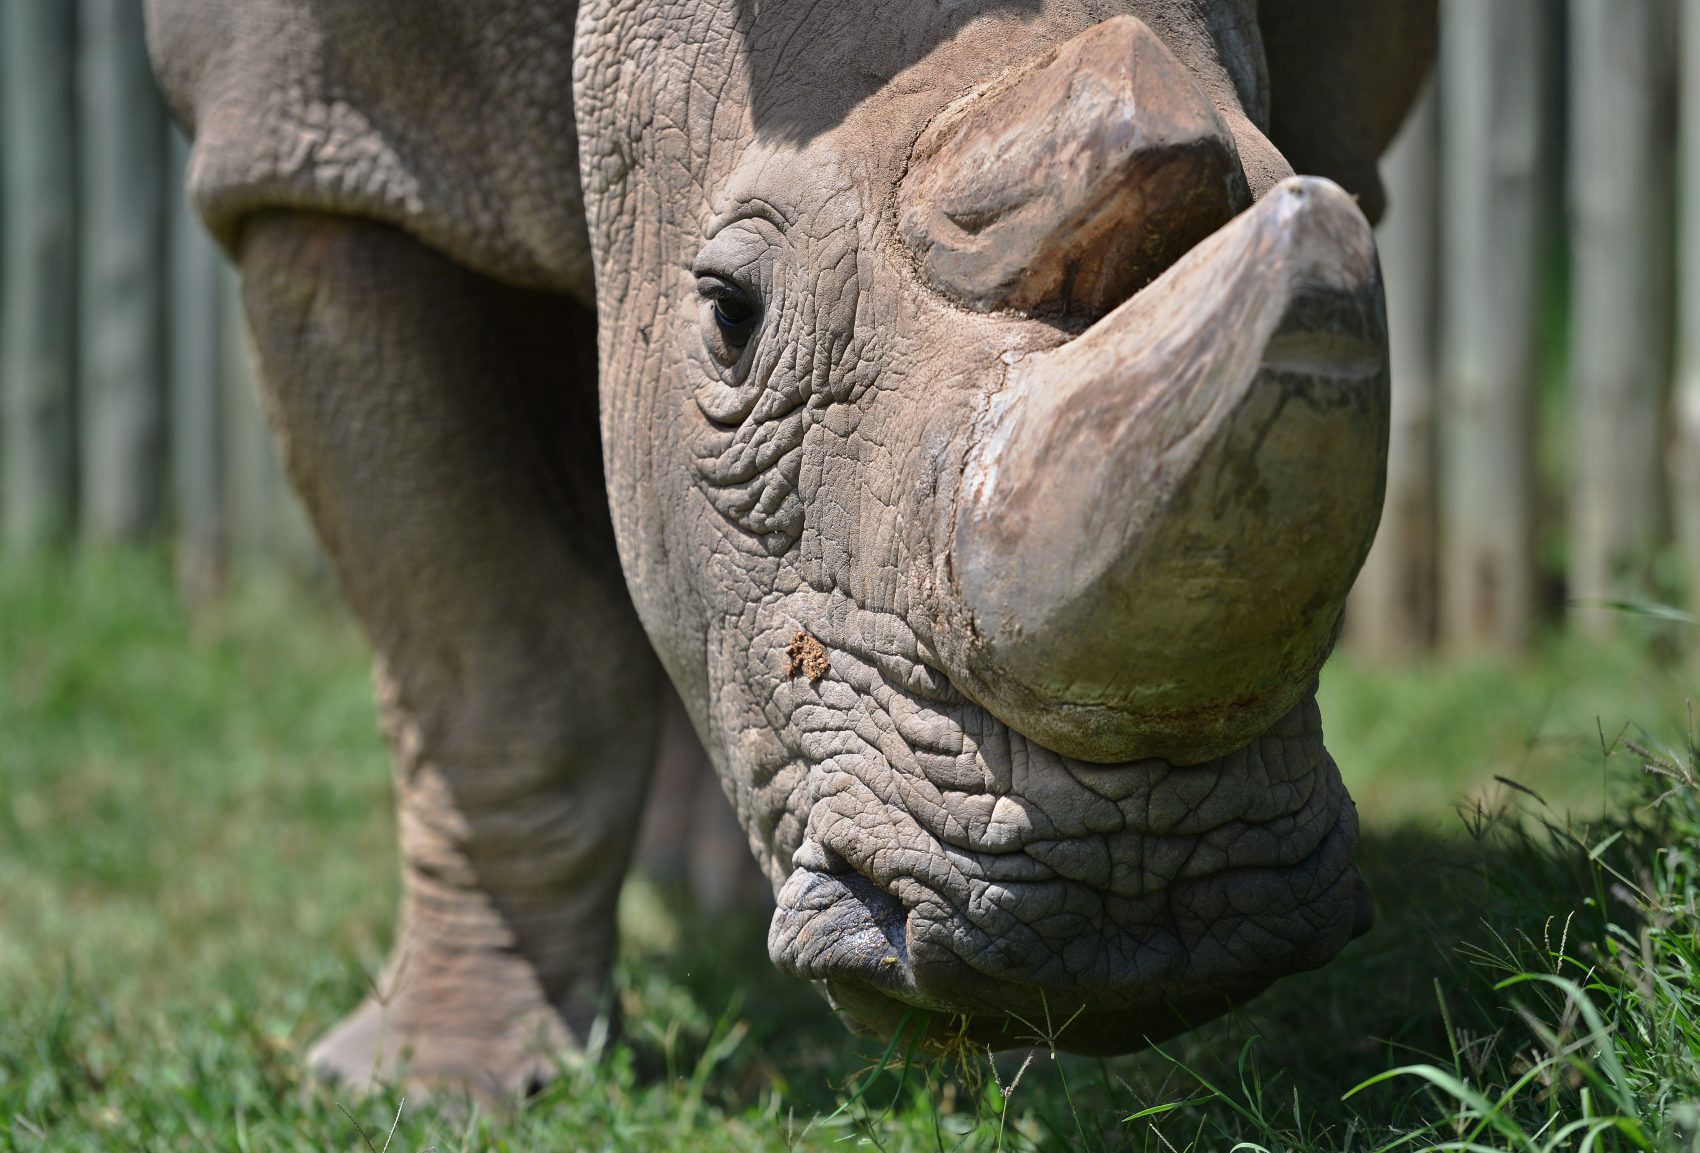 Northern White Rhinos Facing Extinction Here & Now